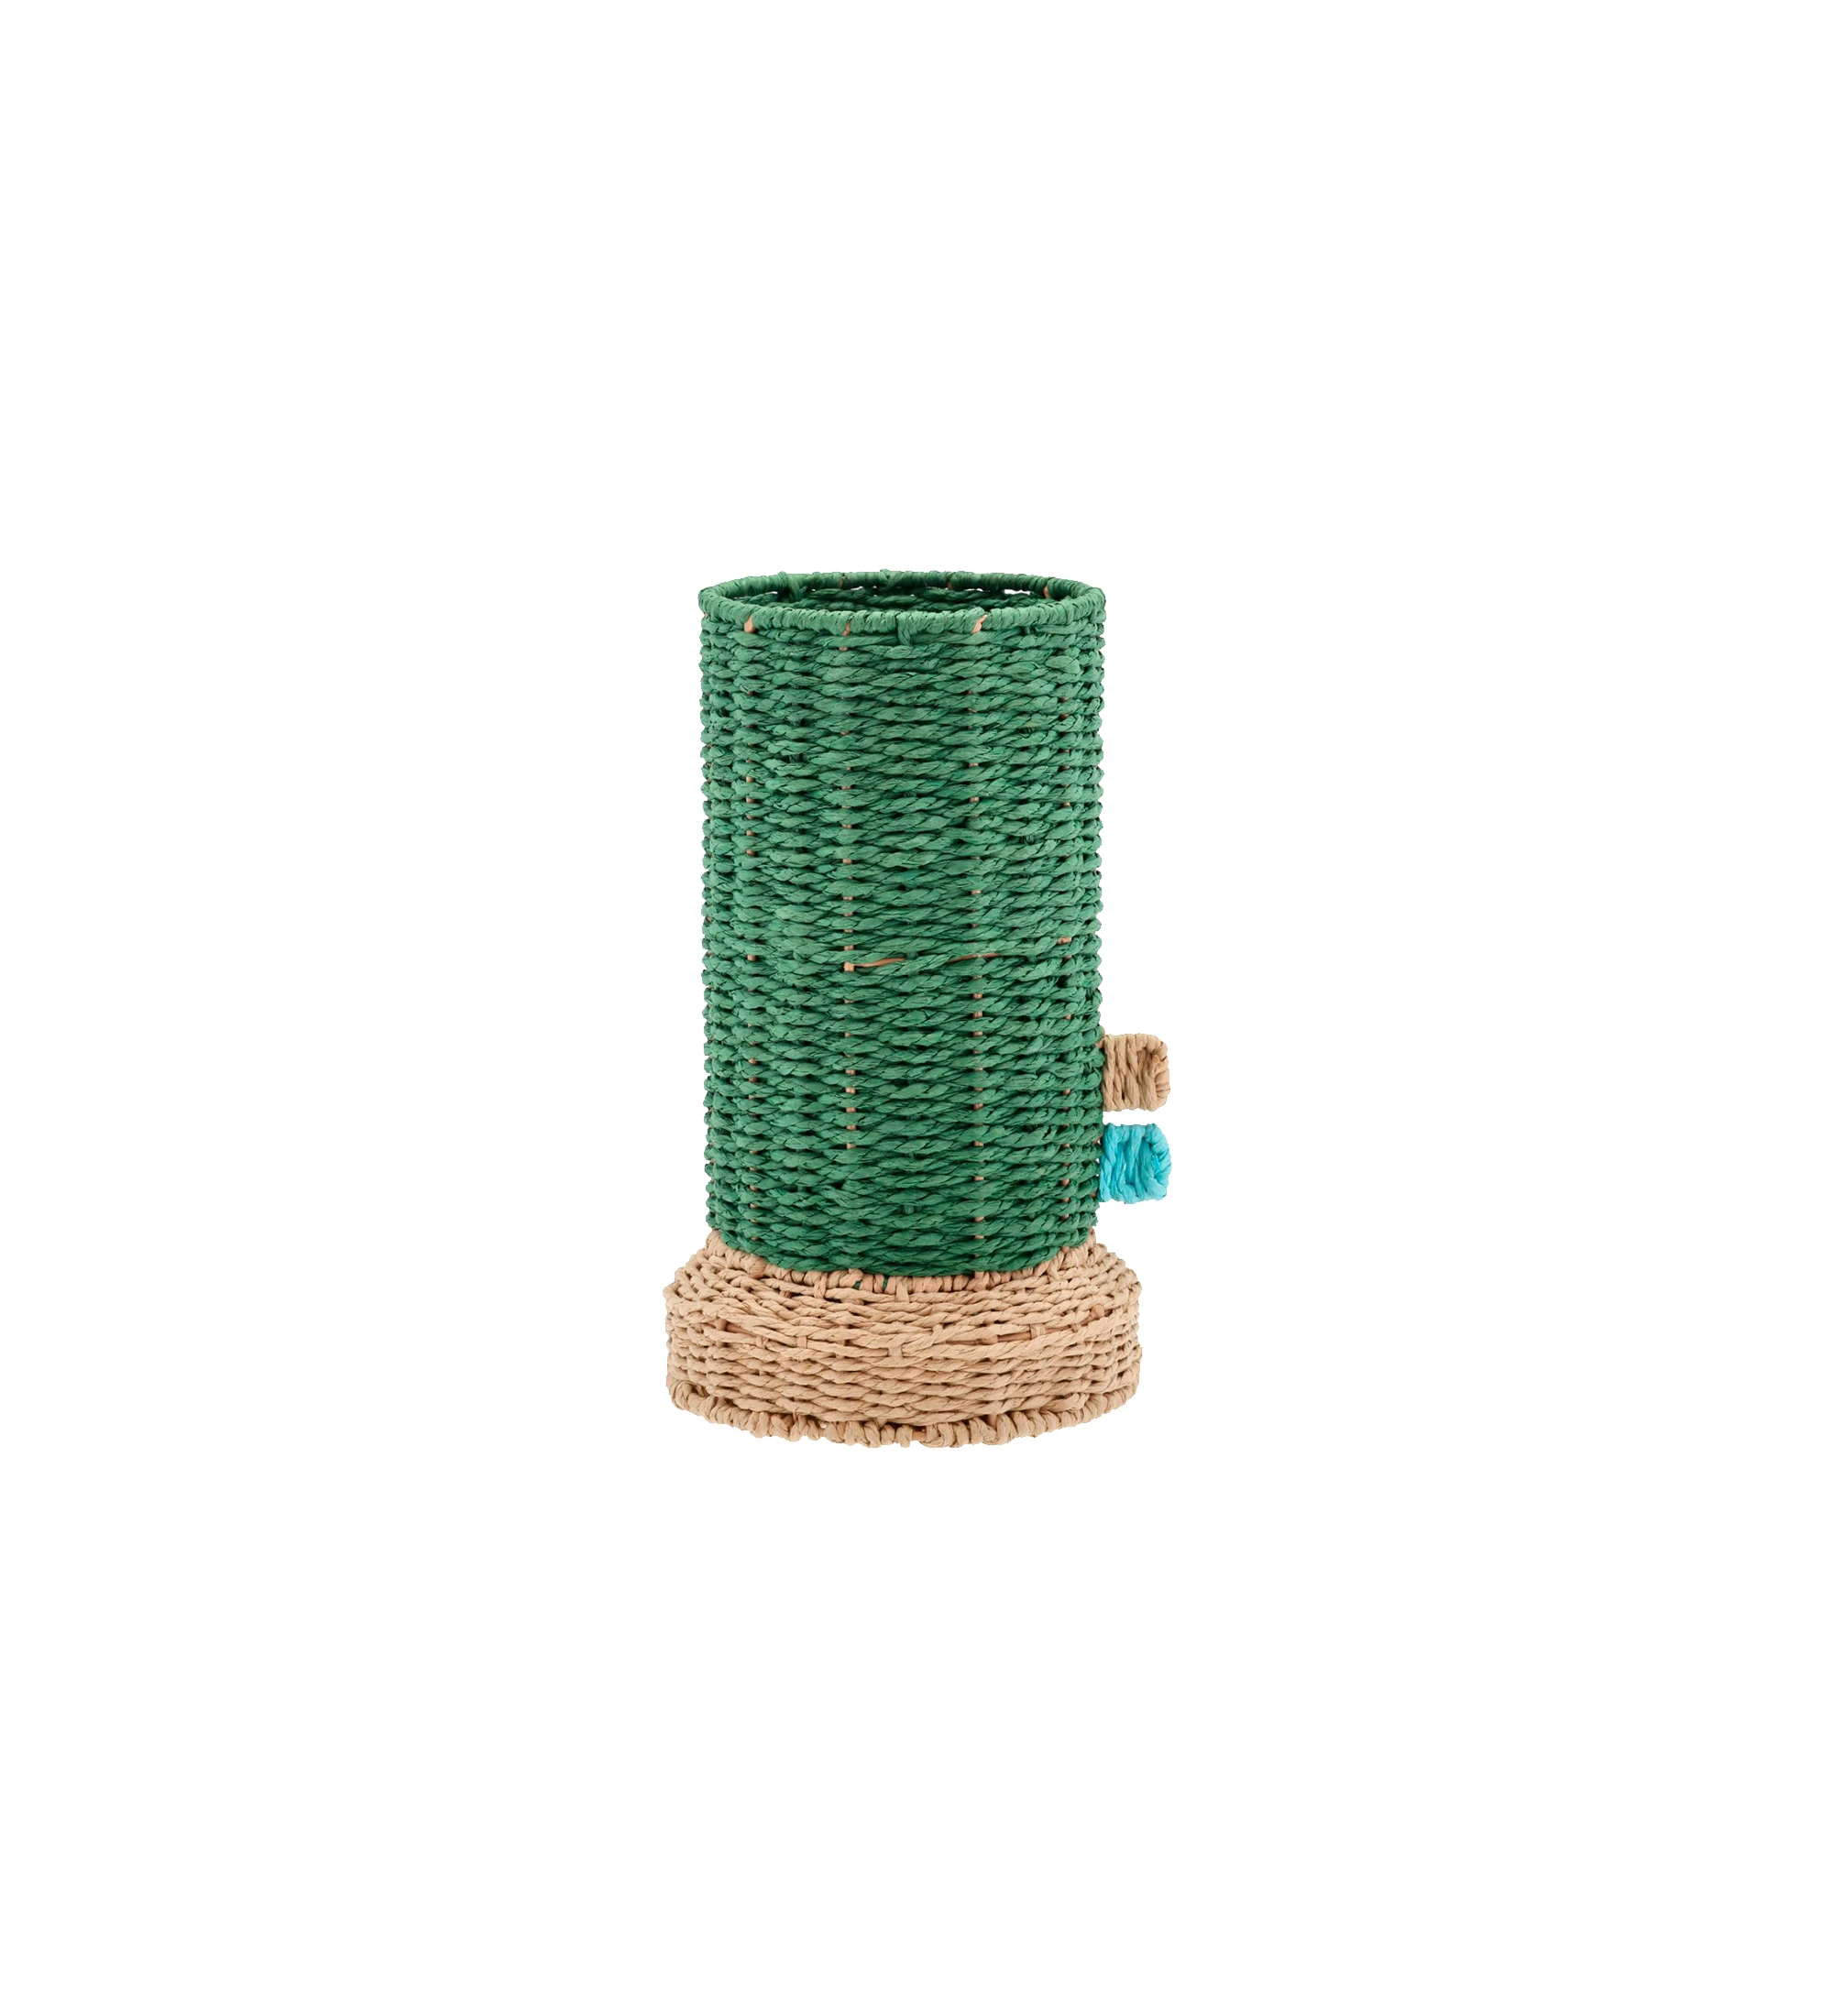 Green paper cord vase with glass container.